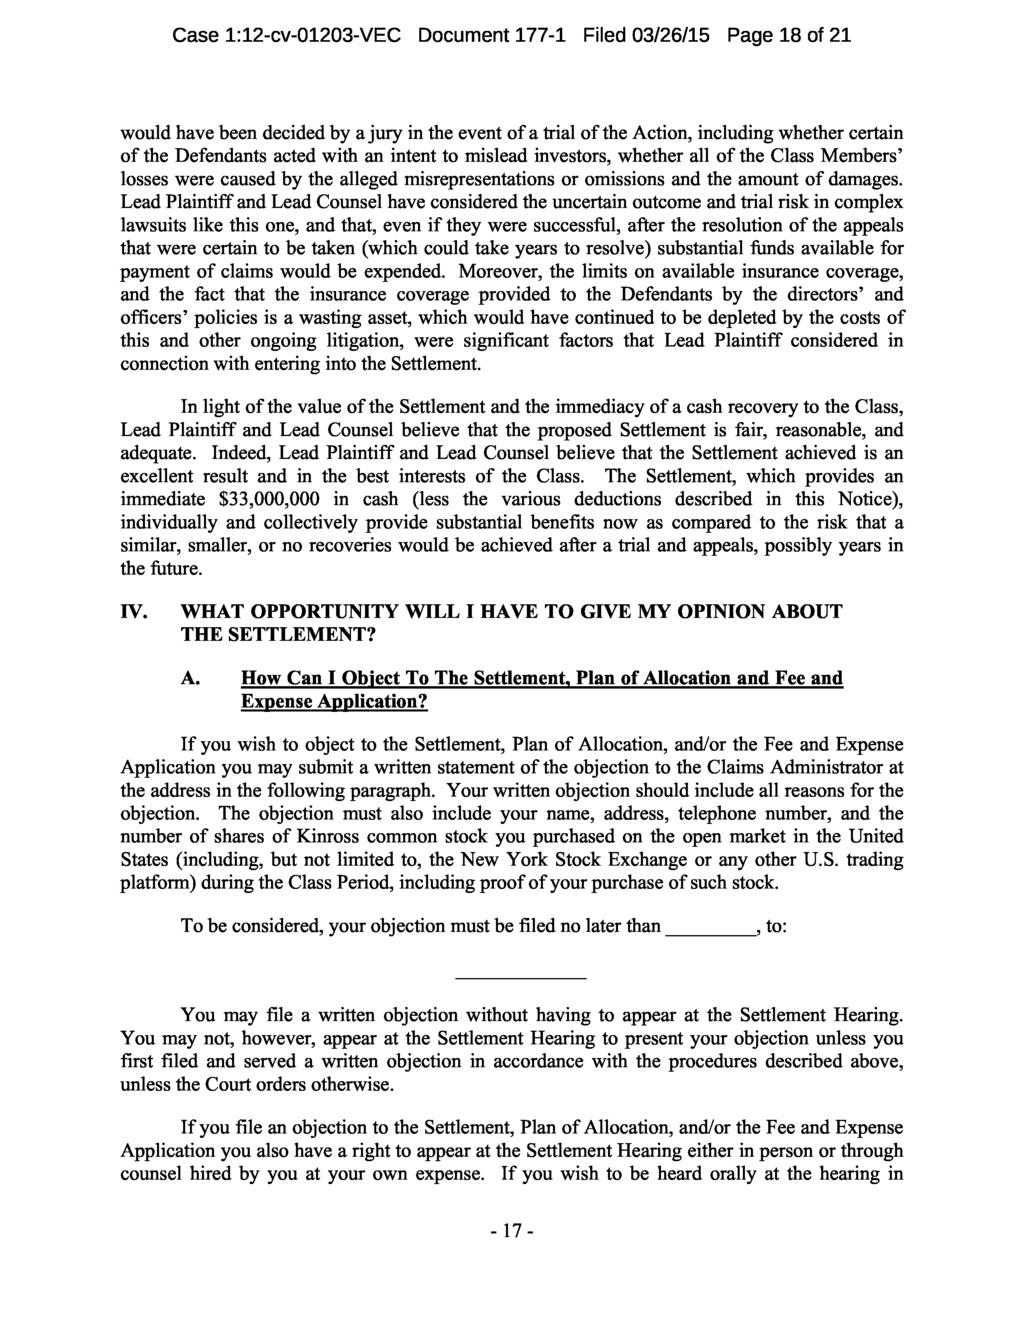 Case 1:12-cv-01203-VEC Document 177-1 Filed 03/26/15 Page 18 of 21 would have been decided by a jury in the event of a trial of the Action, including whether certain of the Defendants acted with an